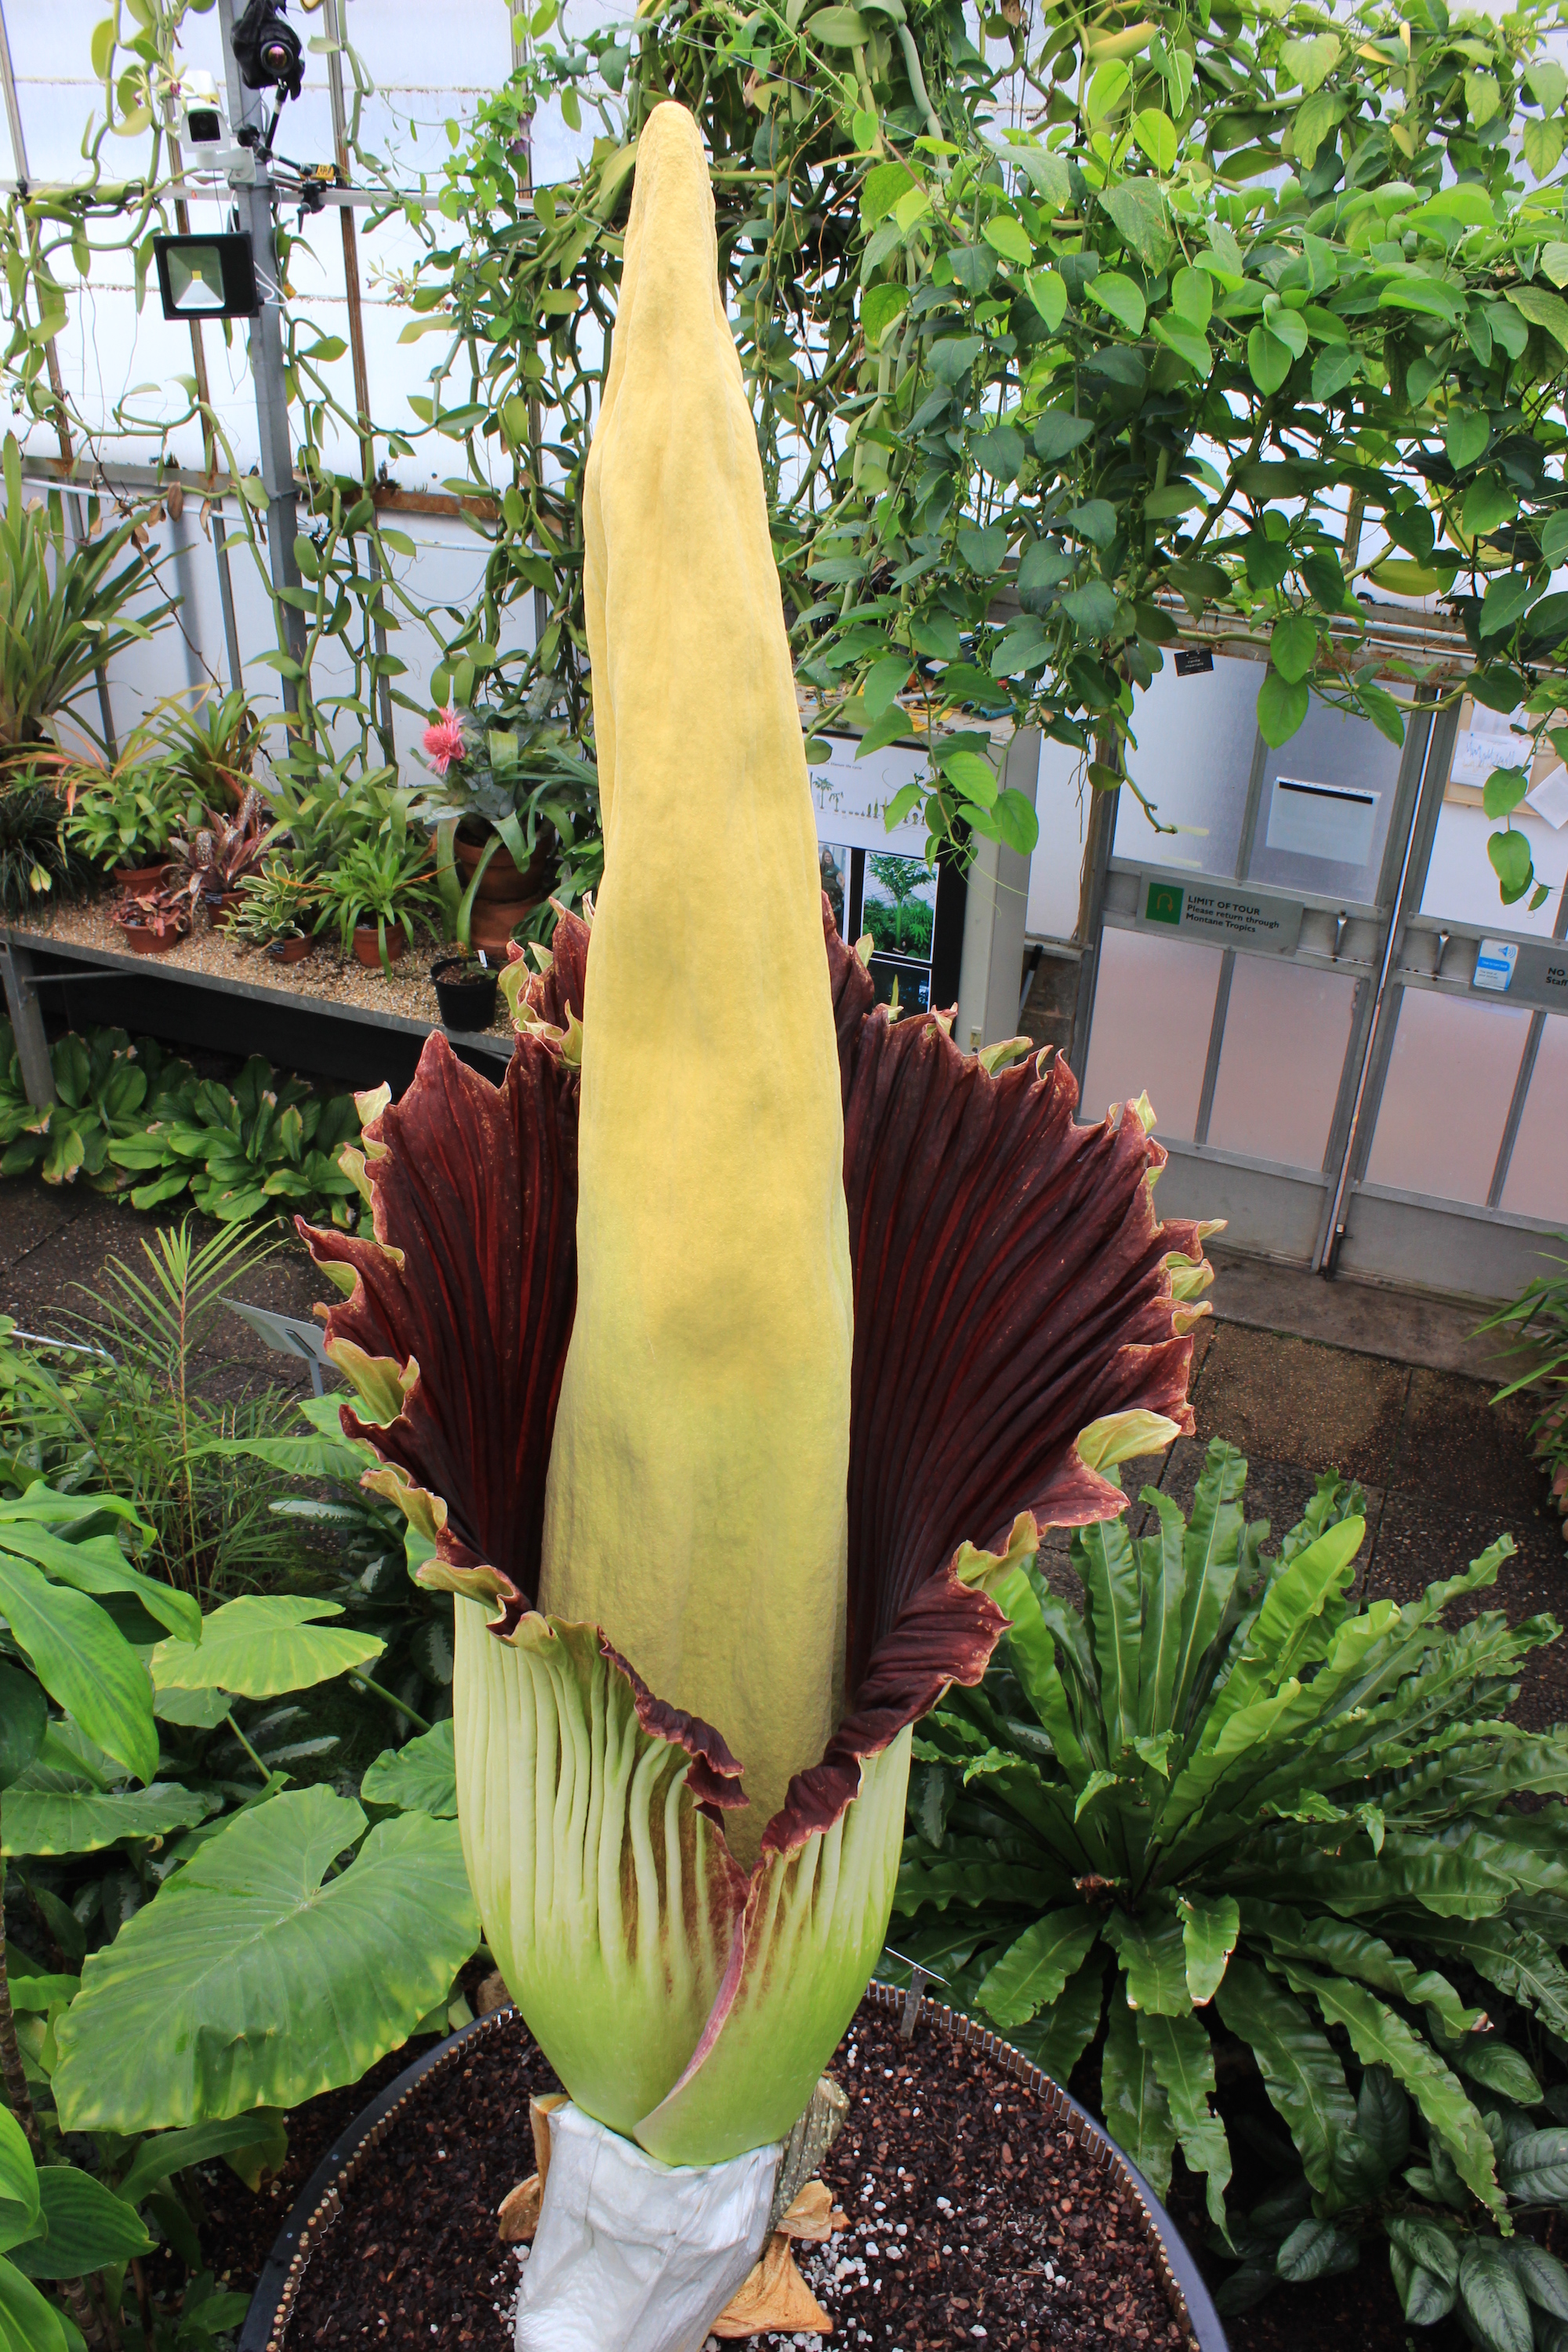 Titan arum in flower at the Botanics for the first time.